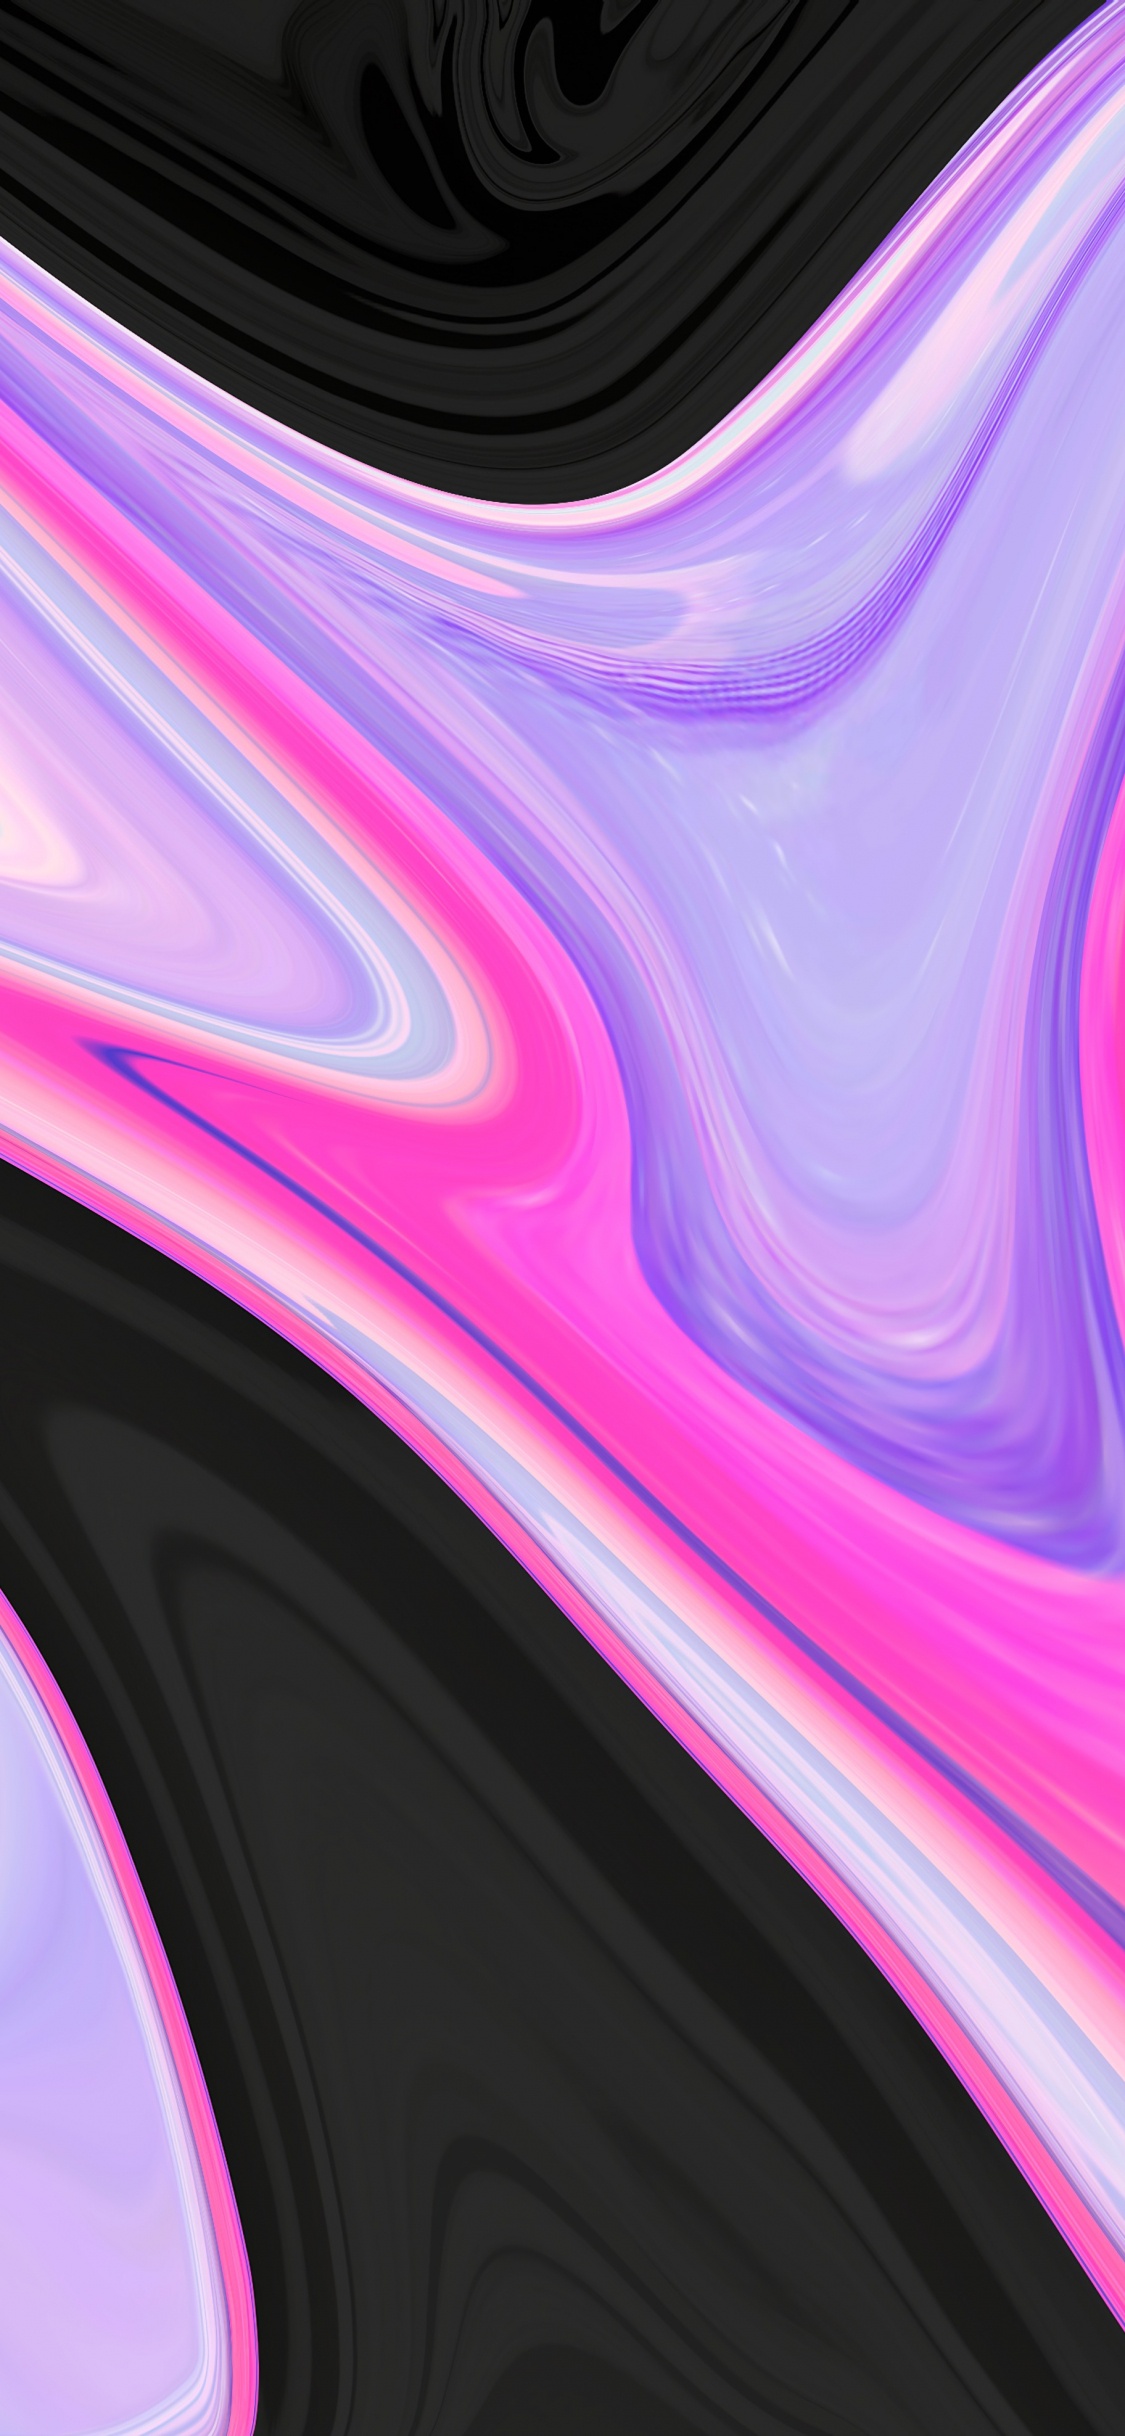 Purple and Black Abstract Painting. Wallpaper in 1125x2436 Resolution